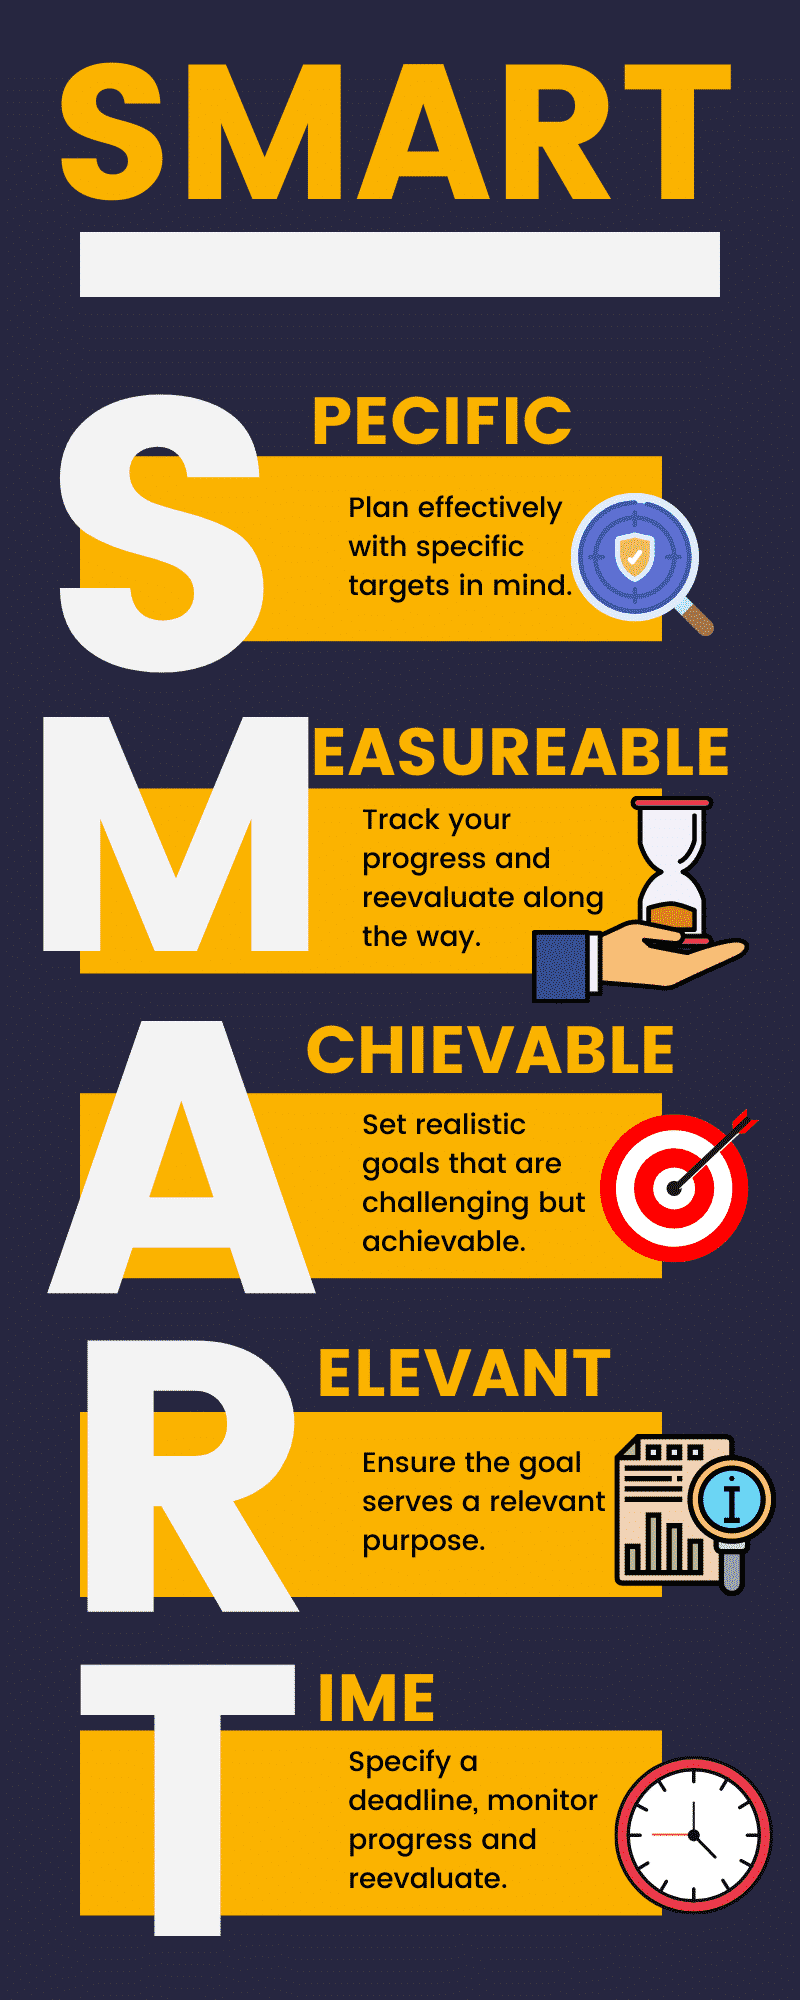 SMART infographic with what each letter of SMART stands for with a small explanation.